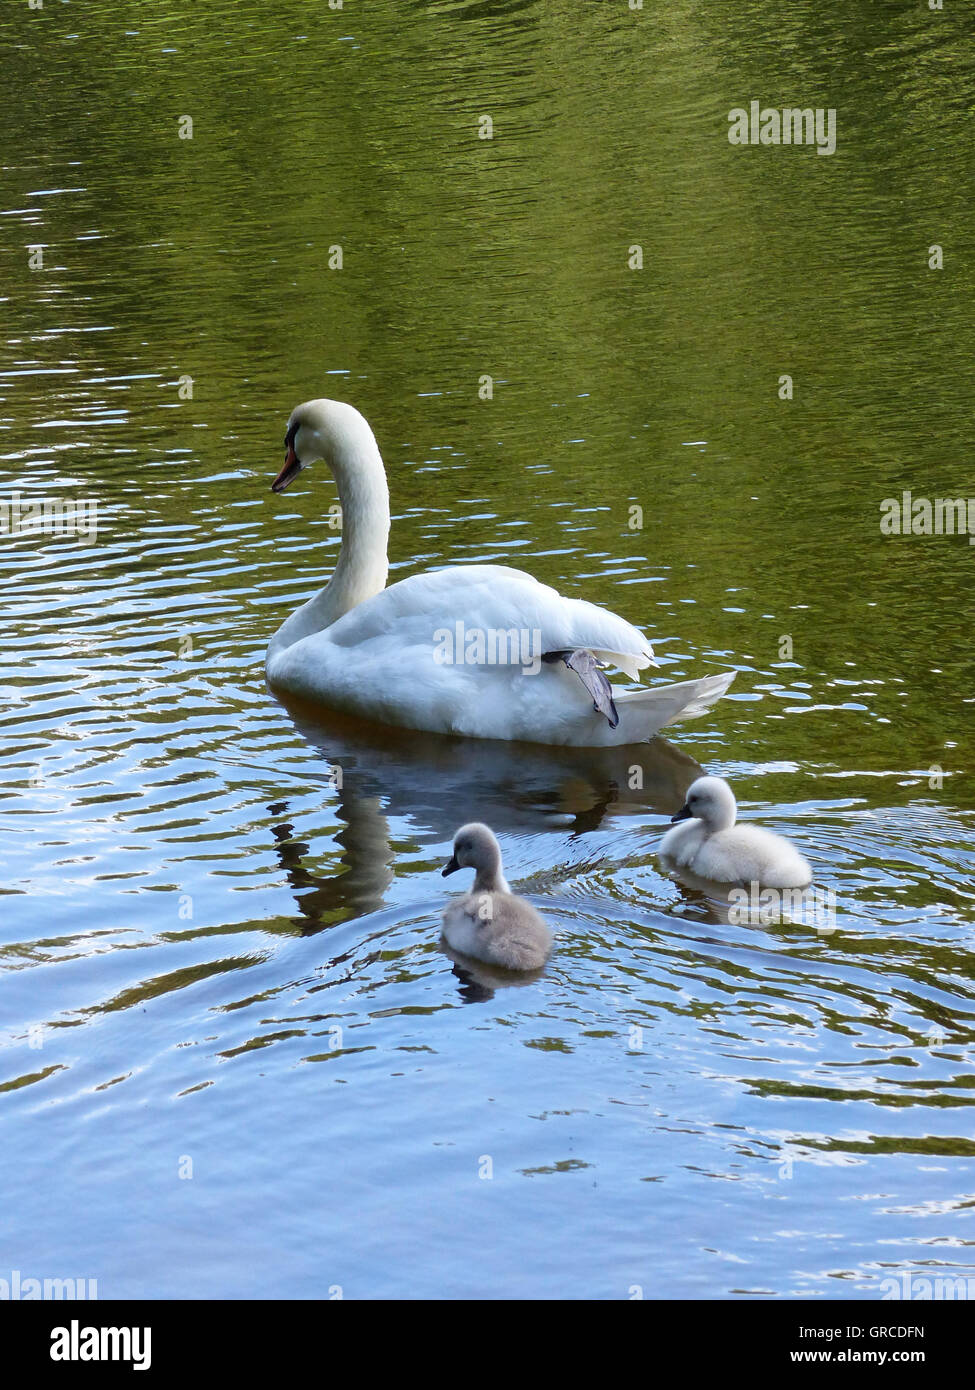 Swan Mum Swimming On The Water Together With Her Two Little Gosling, The Fledglings Are About Two Weeks Old Stock Photo